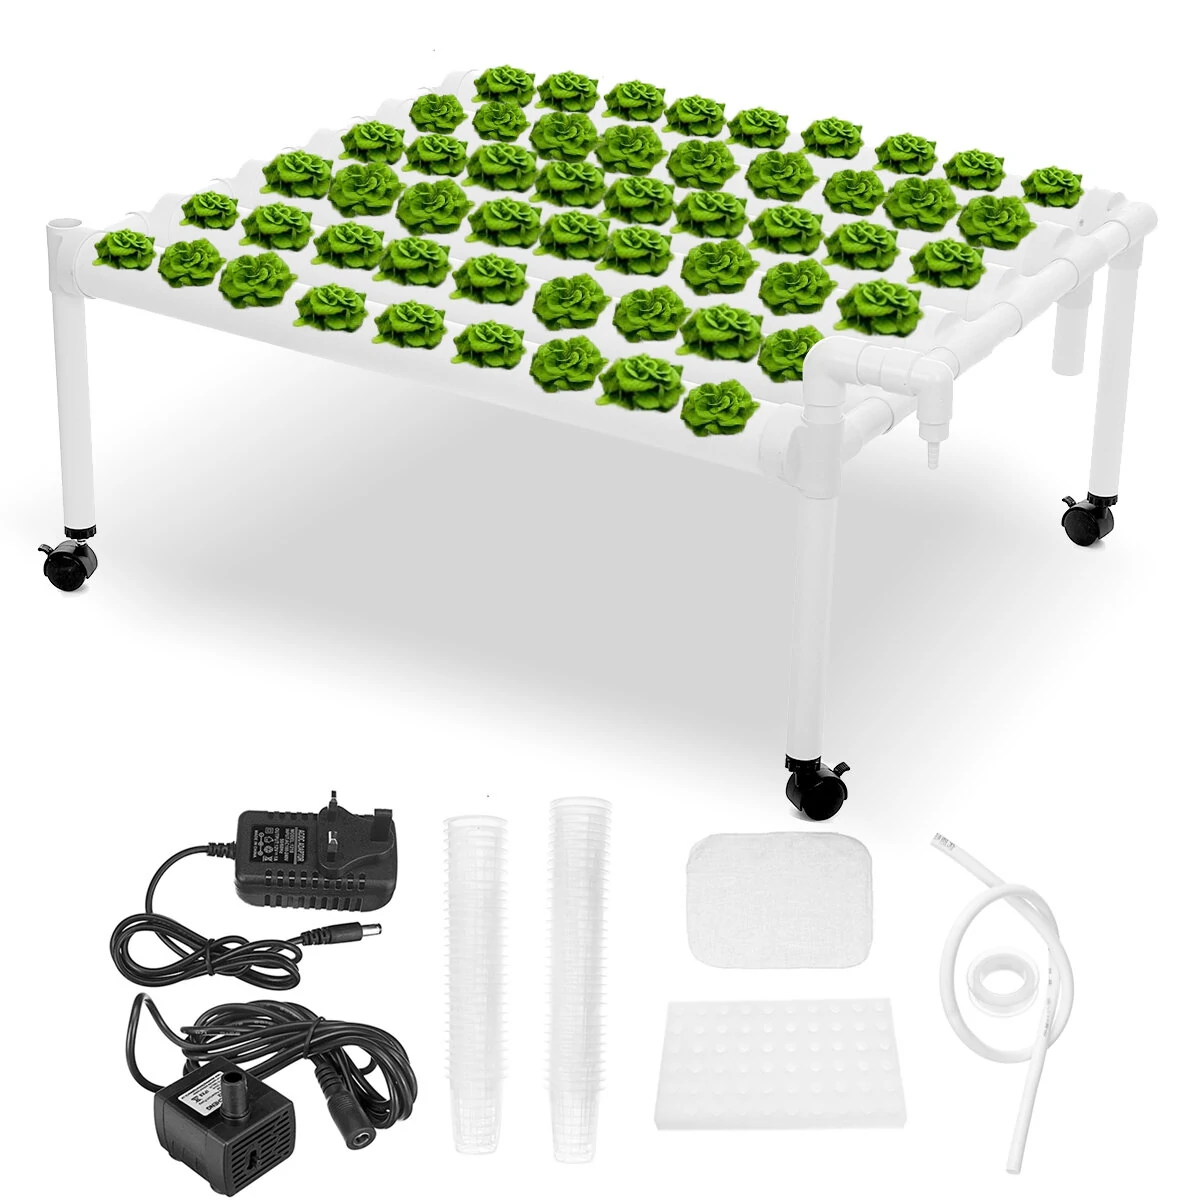 110-220V 1 Layer Hydroponic Growing Kit 6 Pipes 54 Holes Vertical Style Double Side Water Curlture Set Garden Vegetable Planting System Kit Tools - EU Plug